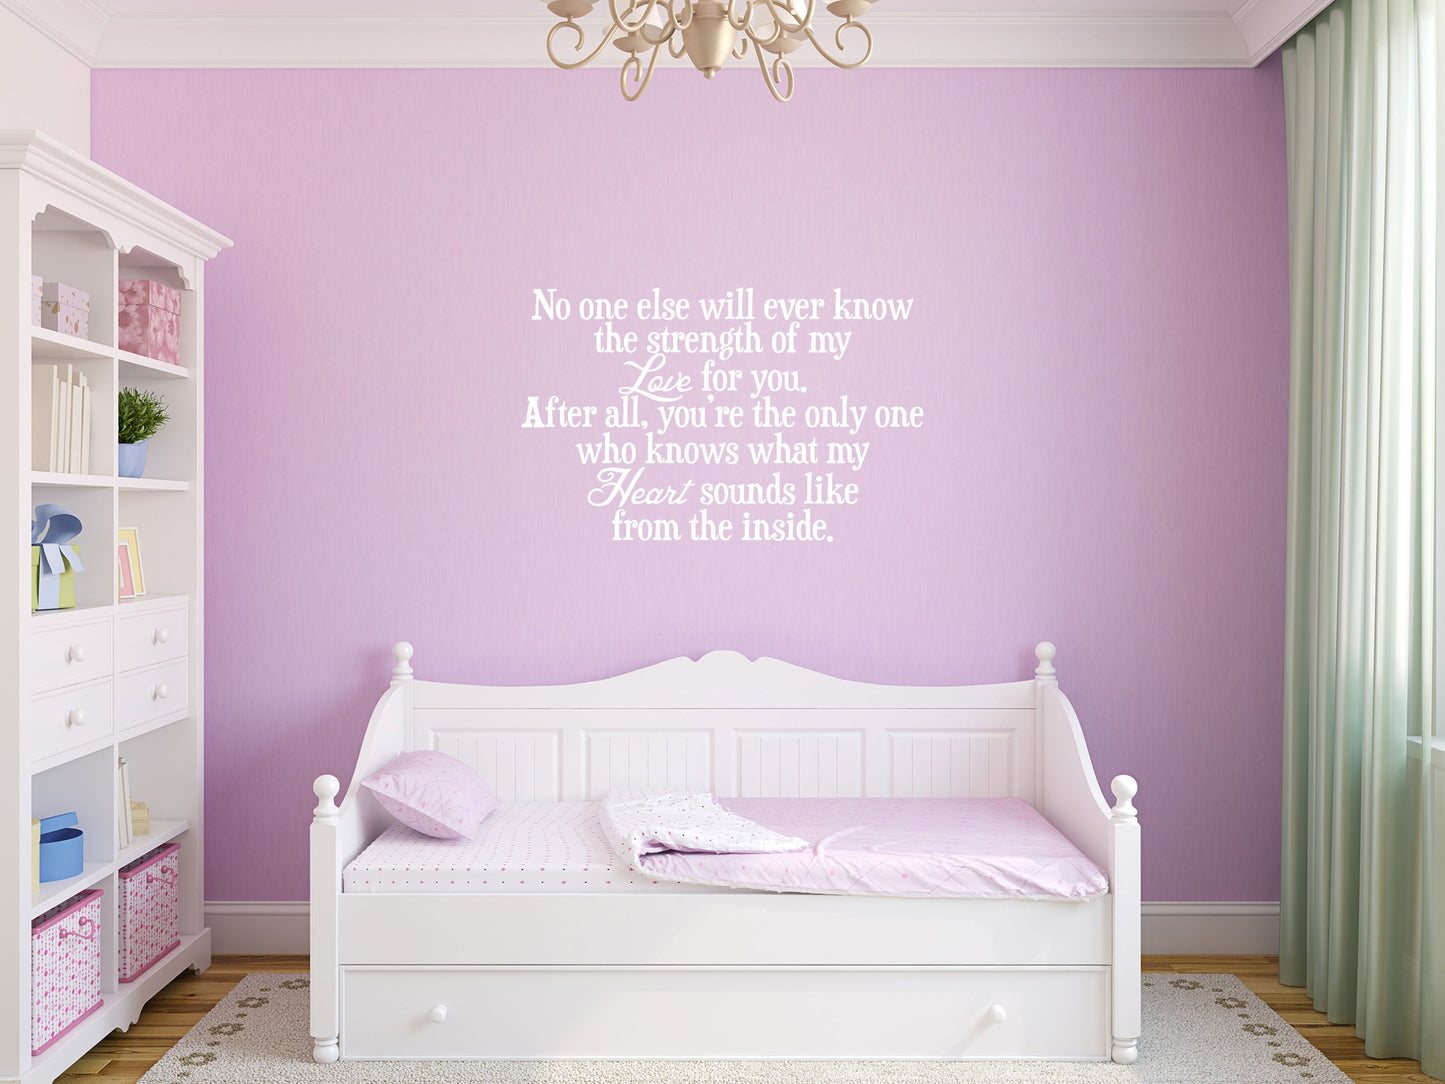 No One Else Will Ever Know The Strength Of My Love For You - Inspirational Wall Decals Vinyl Wall Decal Inspirational Wall Signs 